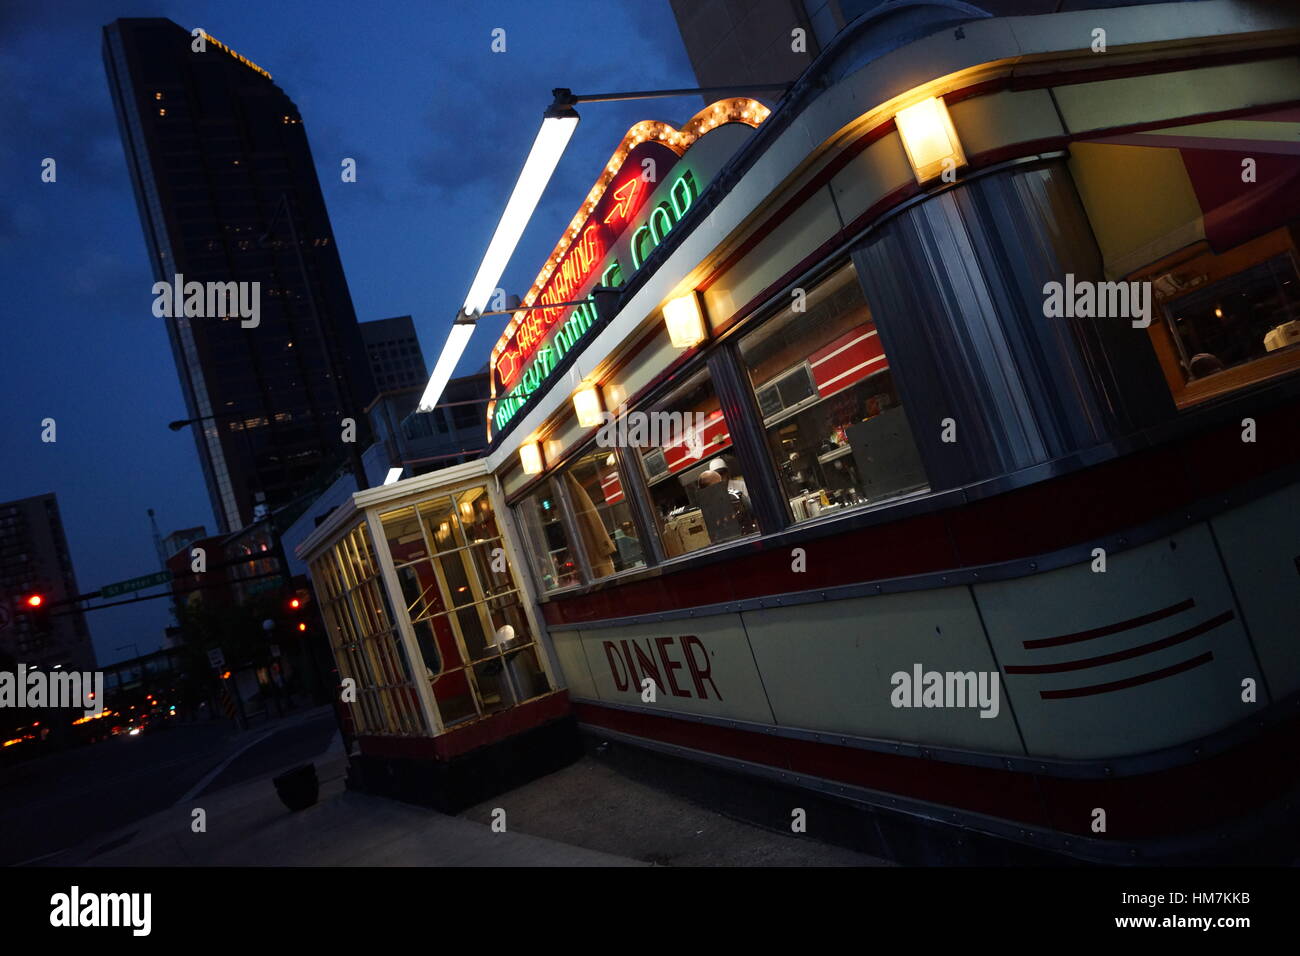 Exterior view of an authentic American fast food diner by night Stock Photo